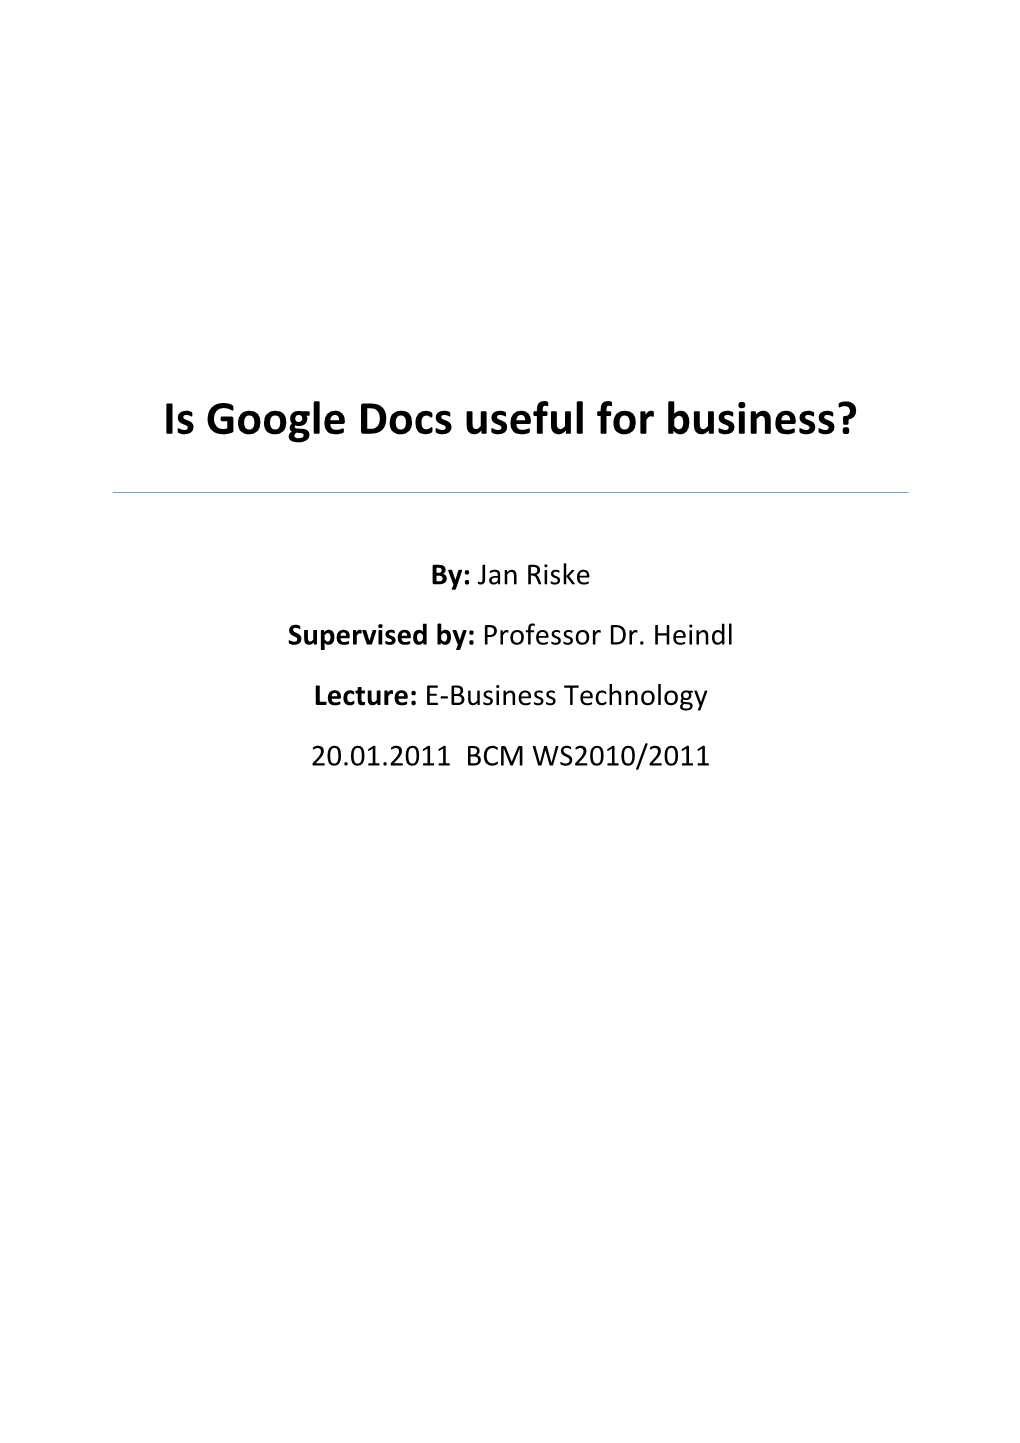 Is Google Docs Useful for Business?